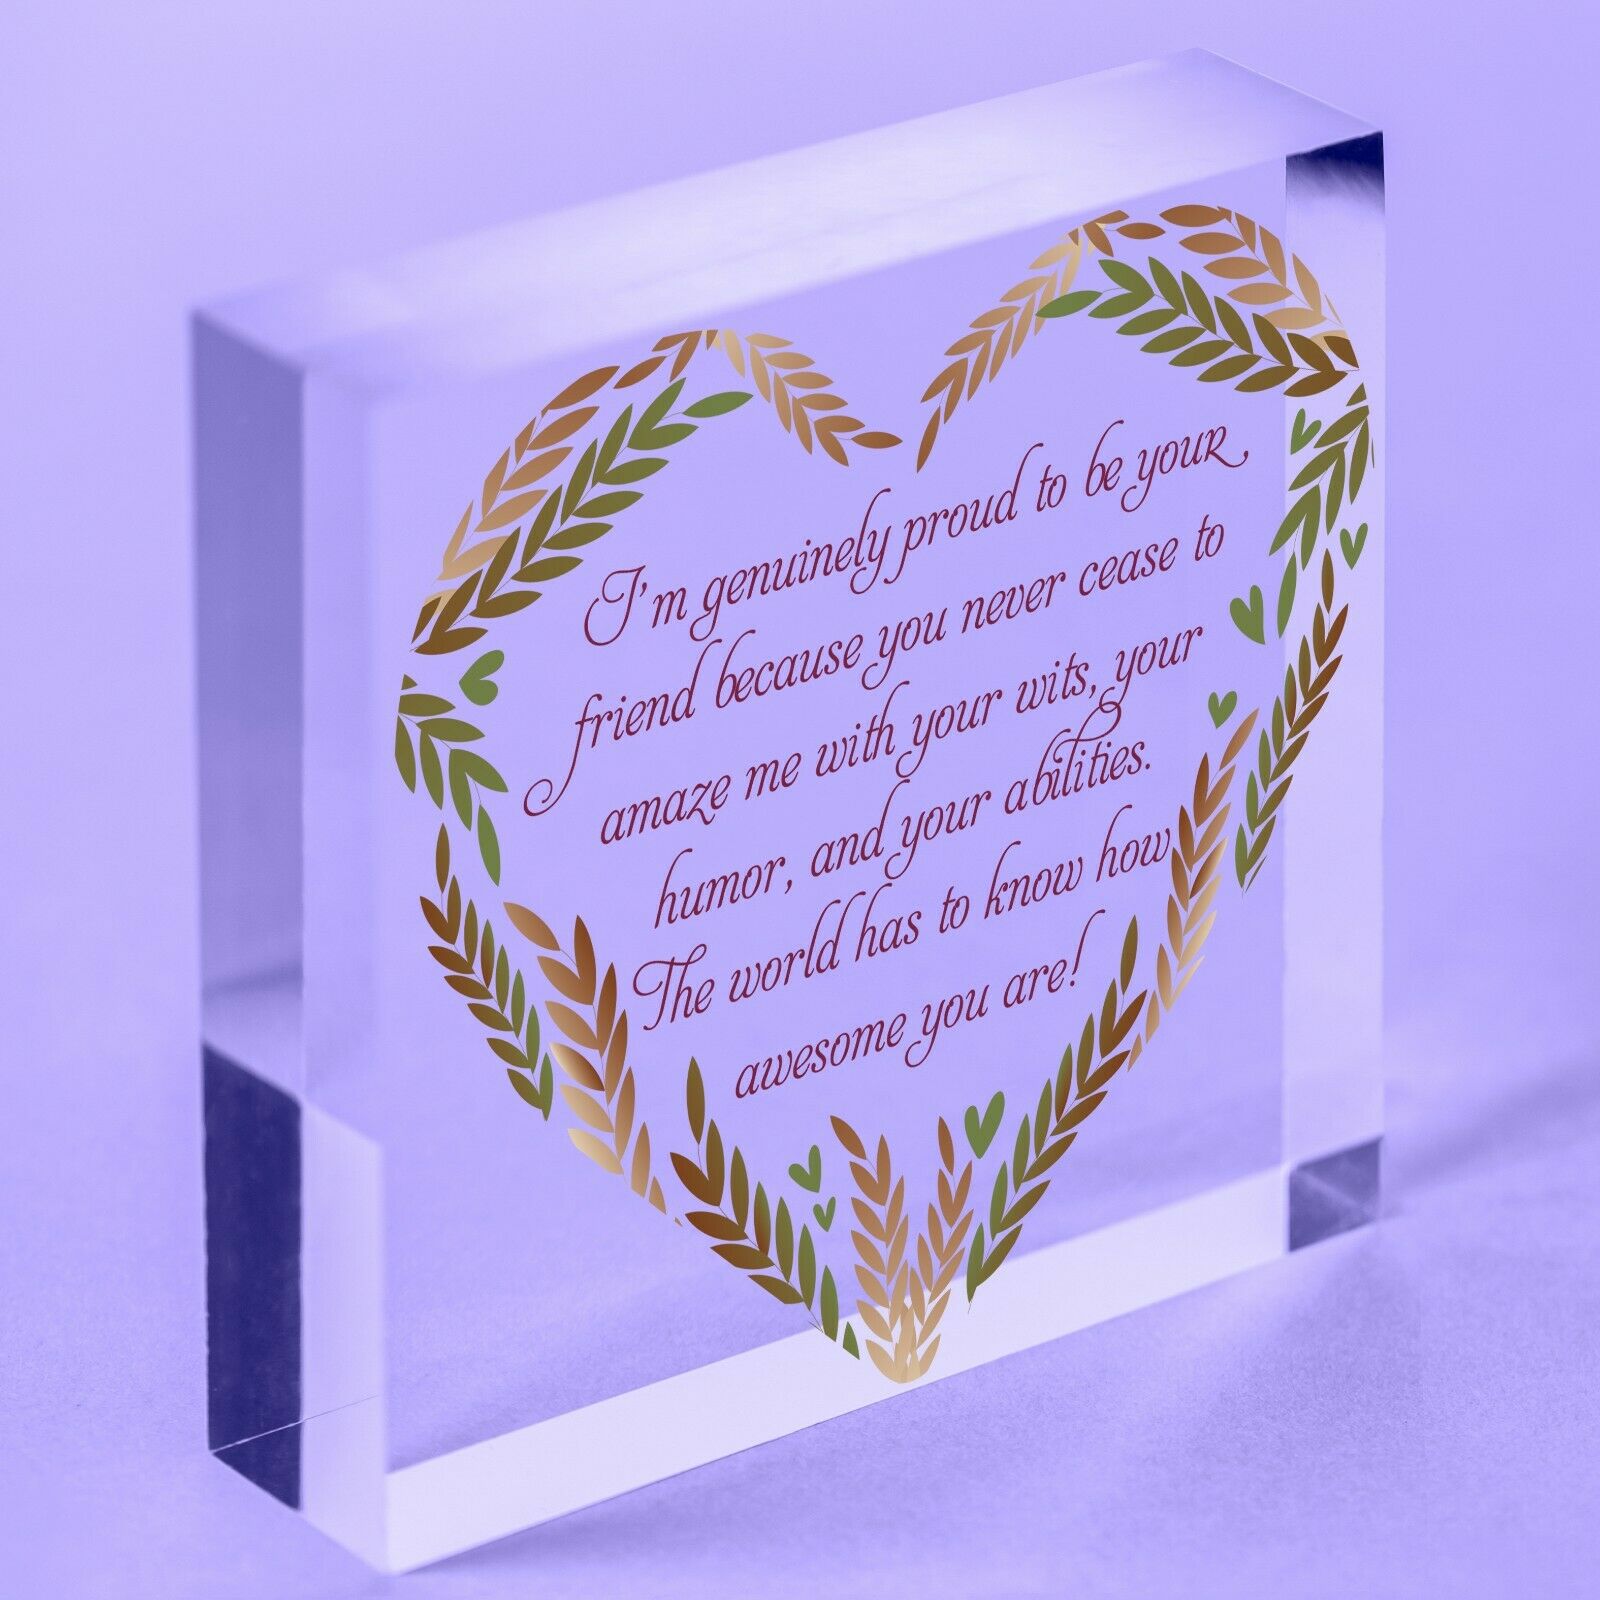 Best Friend Message Acrylic Block Special Occasion Gift Thank You Special